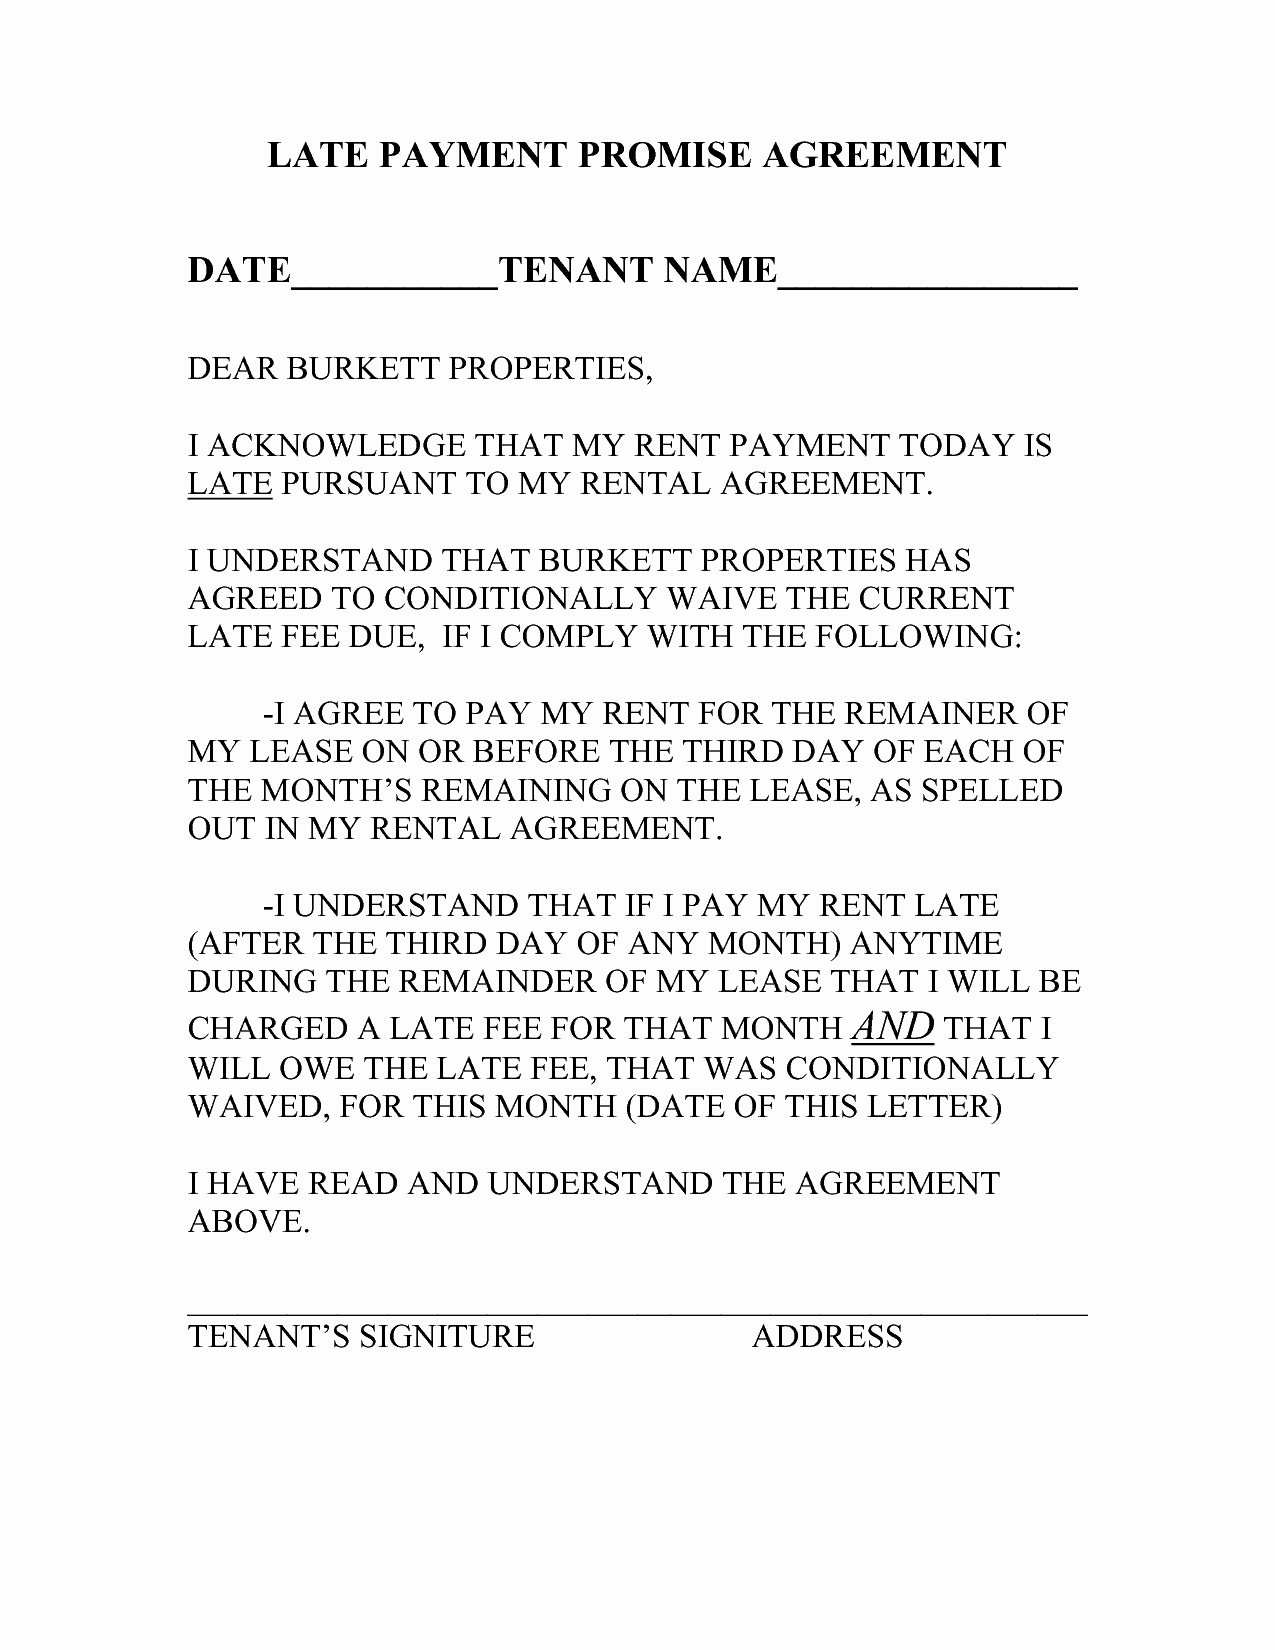 Late Rent Payment Letter Fresh Late Rent Payment Notice Letter Google Search